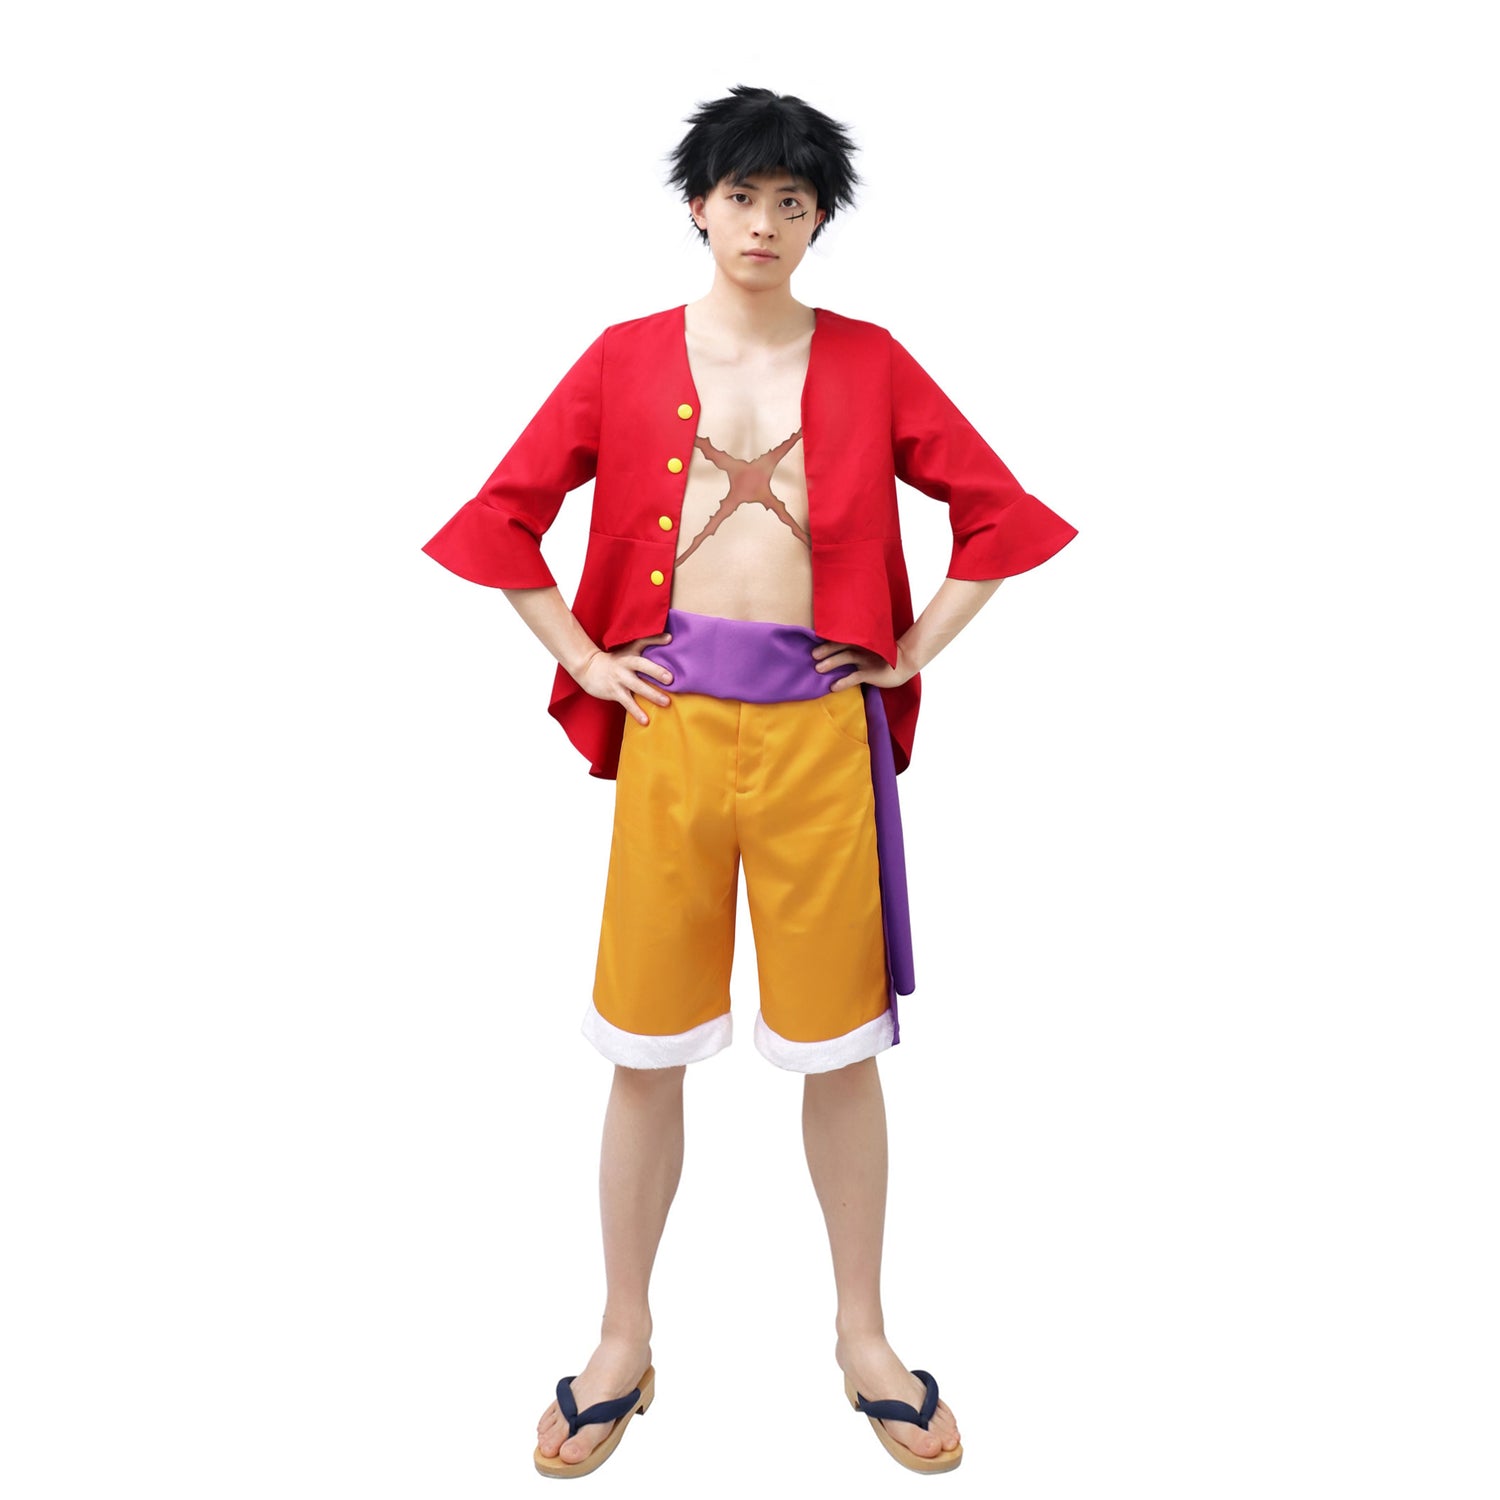 DAZCOS US Size Luffy Cosplay Wano Country Anime Costume Outfit with Purple Pirate Sash